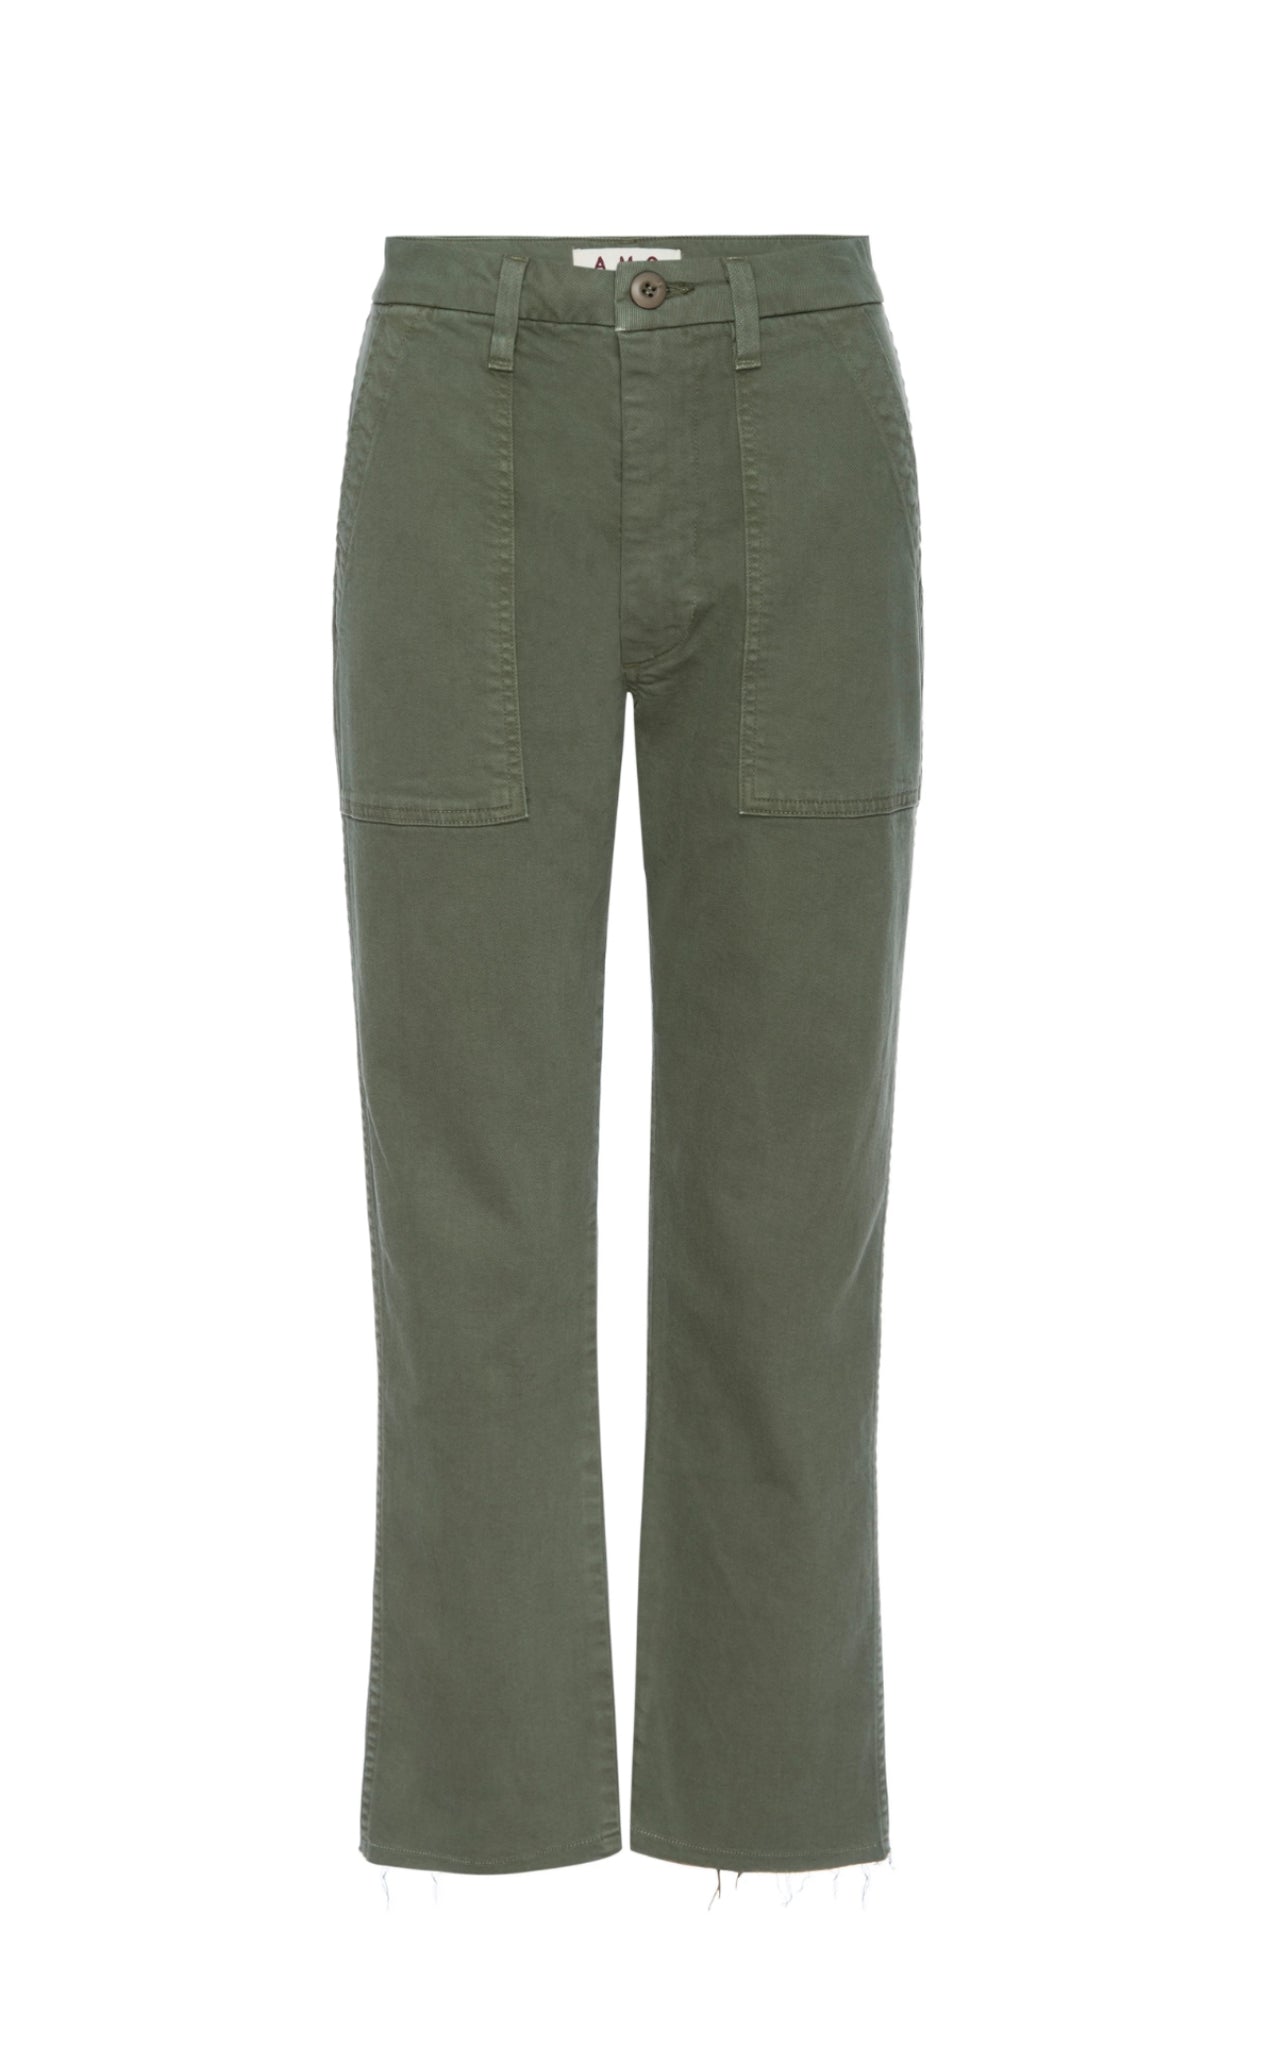 Easy Army Trouser 1